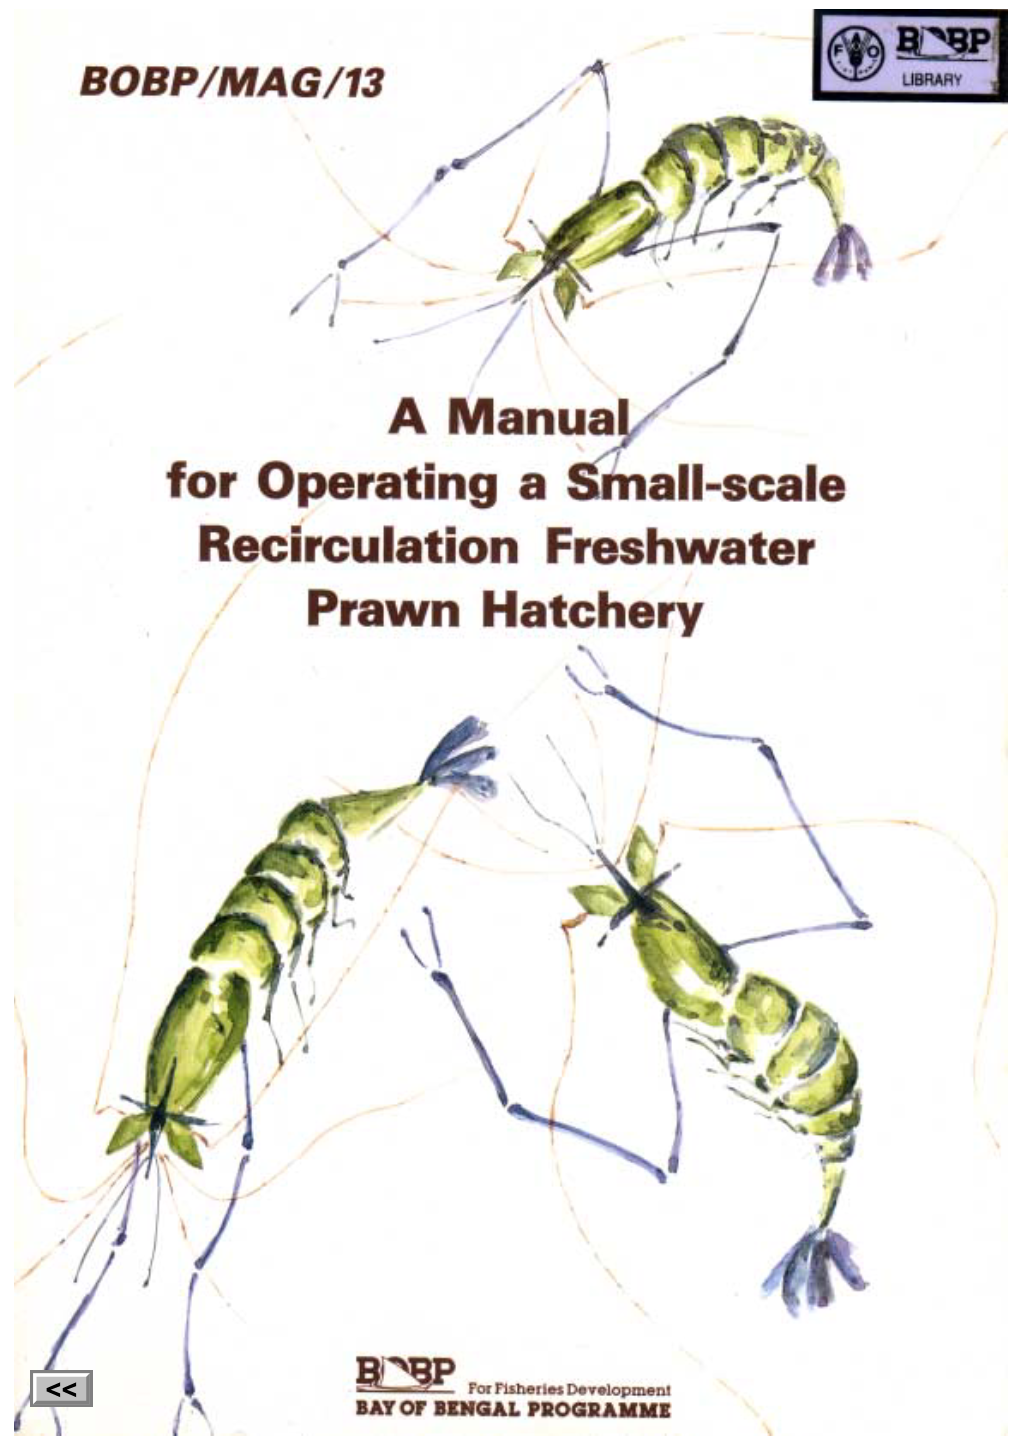 A Manual for Operating a Small-Scale Recirculation Freshwater Prawn Hatchery